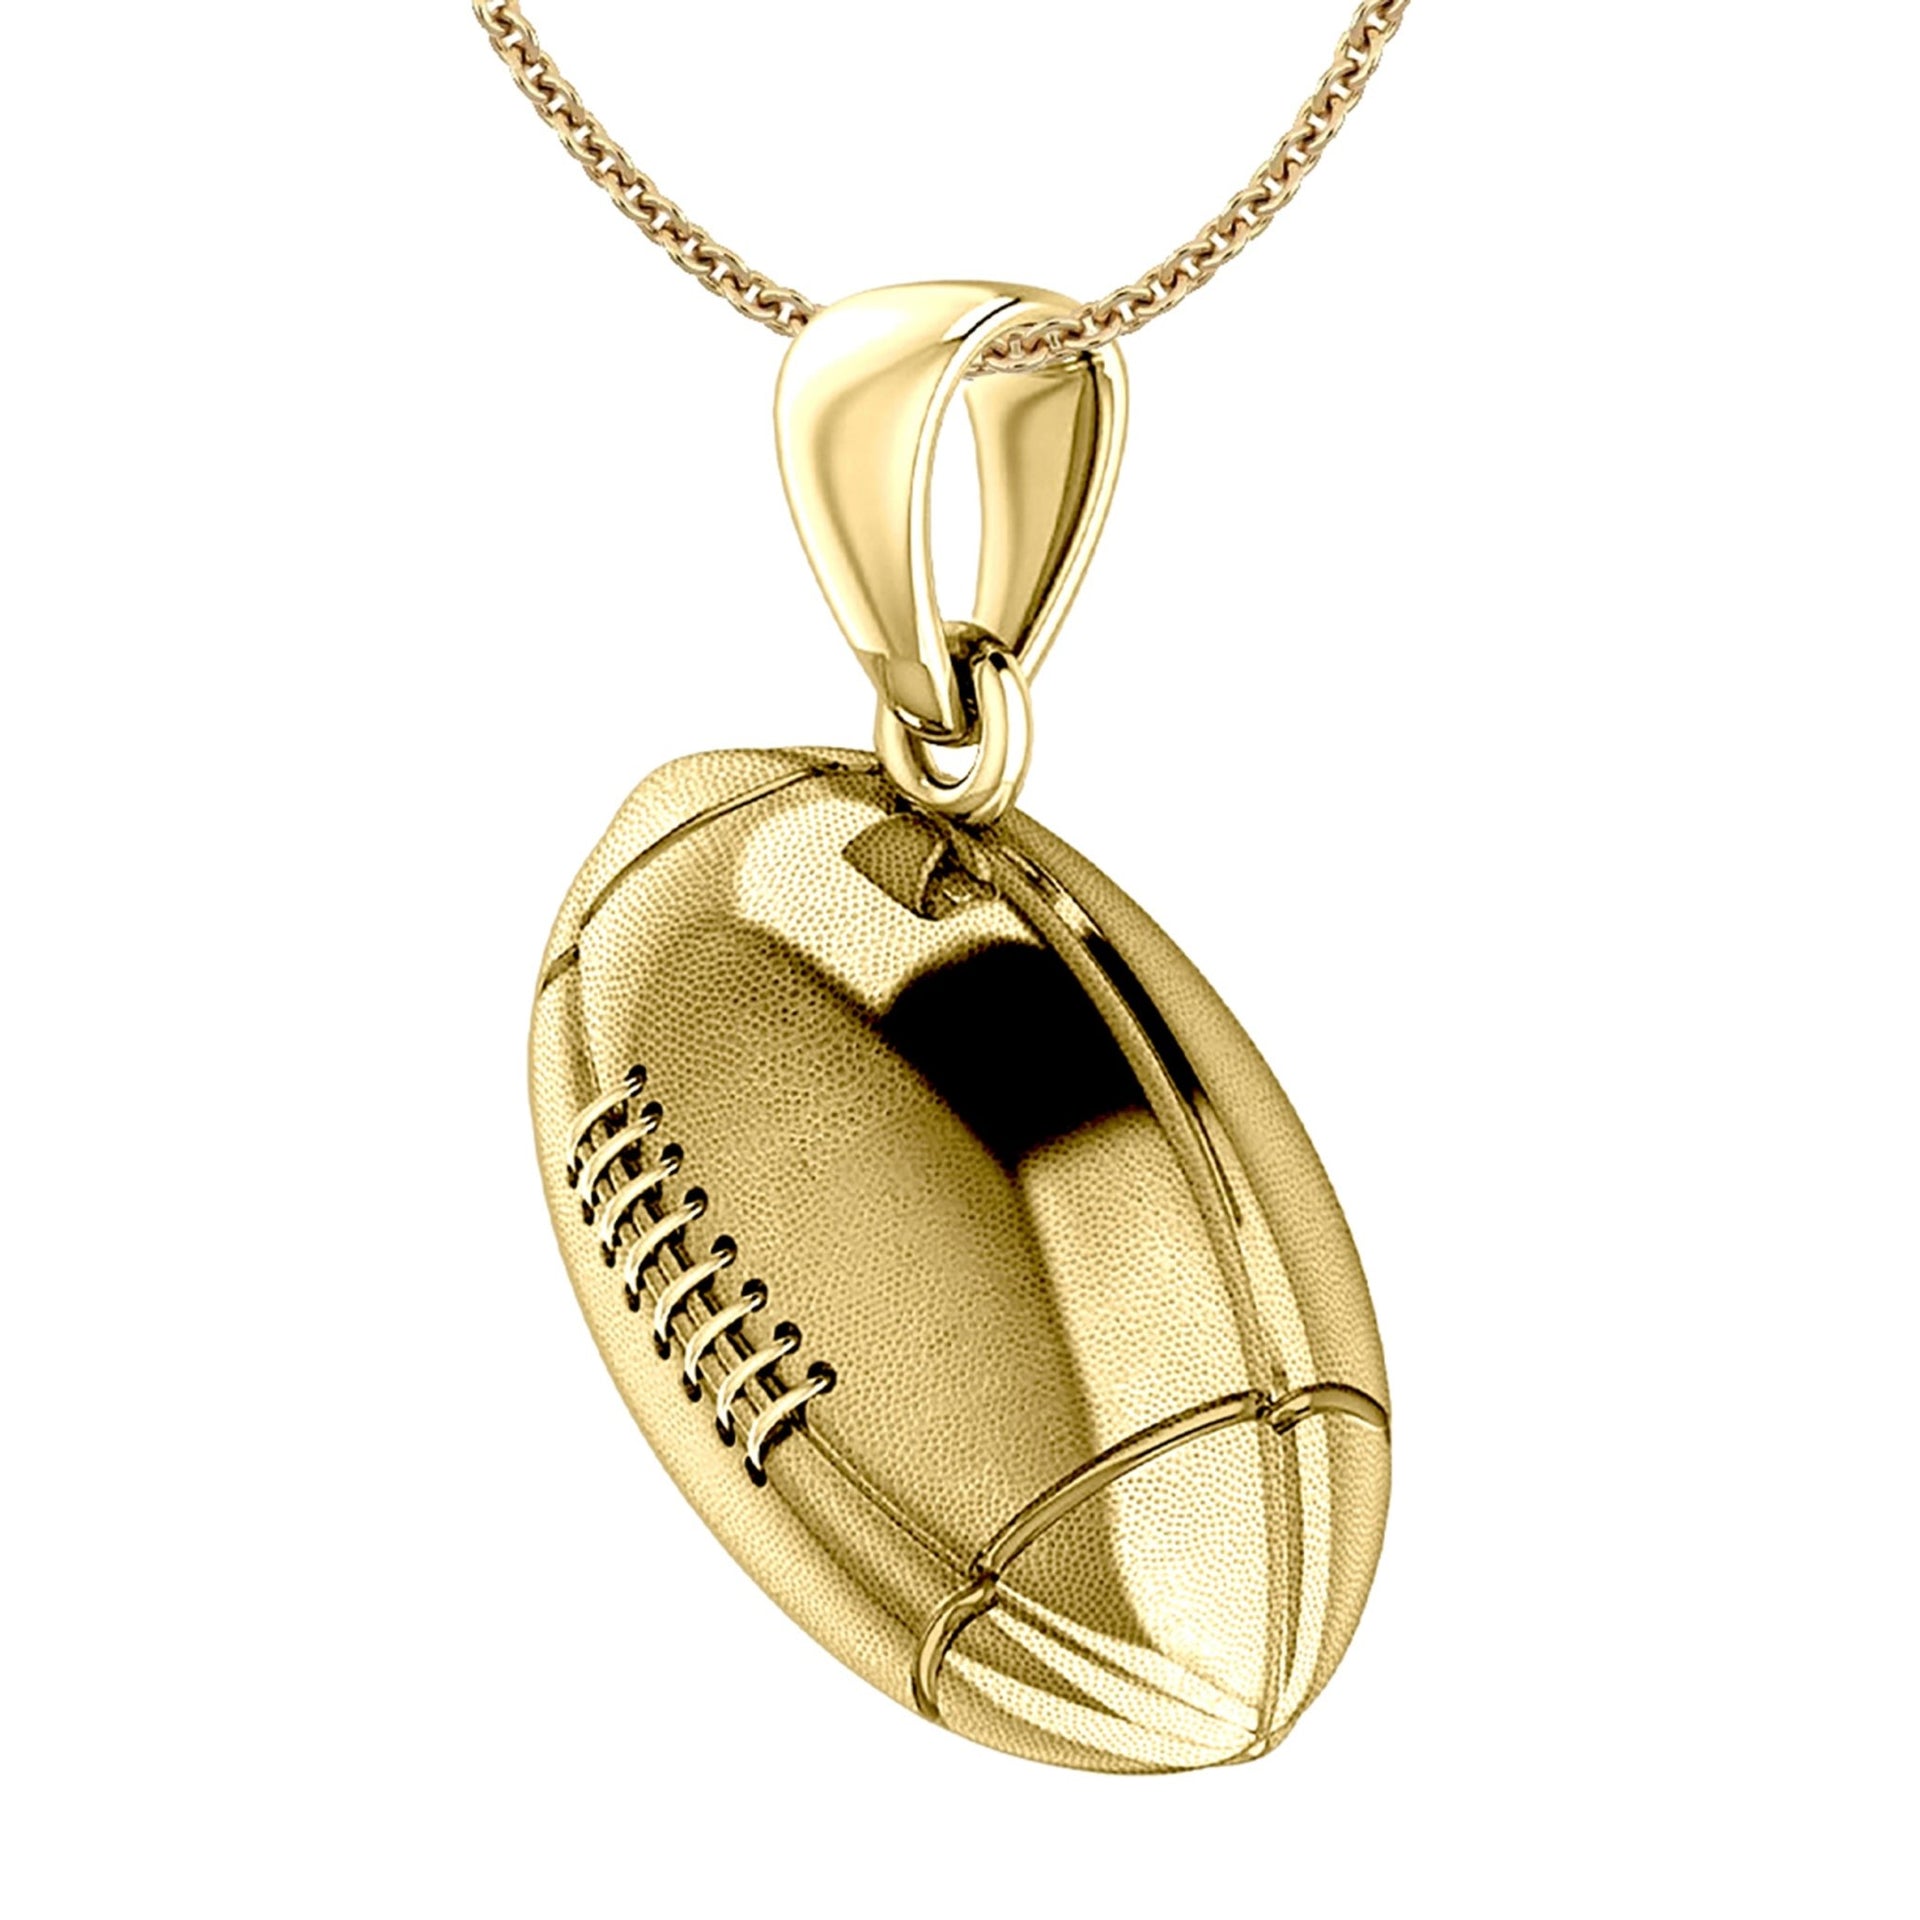 Small 10K or 14K Yellow Gold 3D Football Pendant Necklace, 17mm - US Jewels